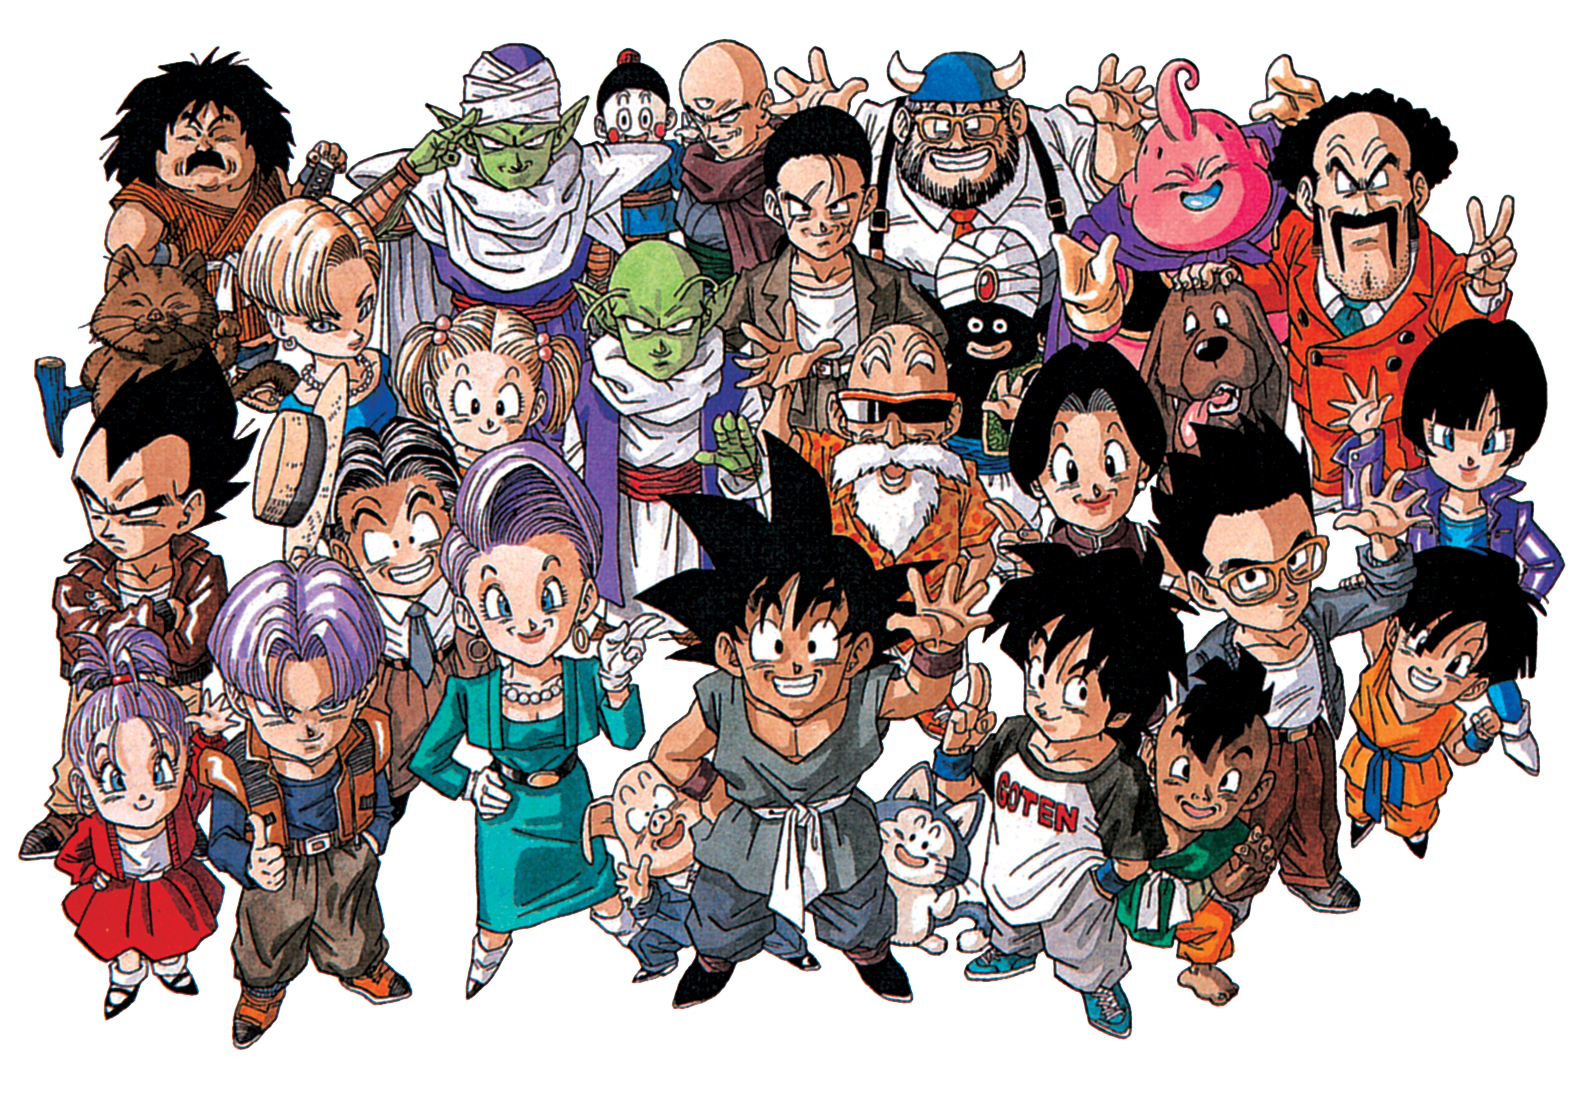 All+dragon+ball+z+characters+pictures